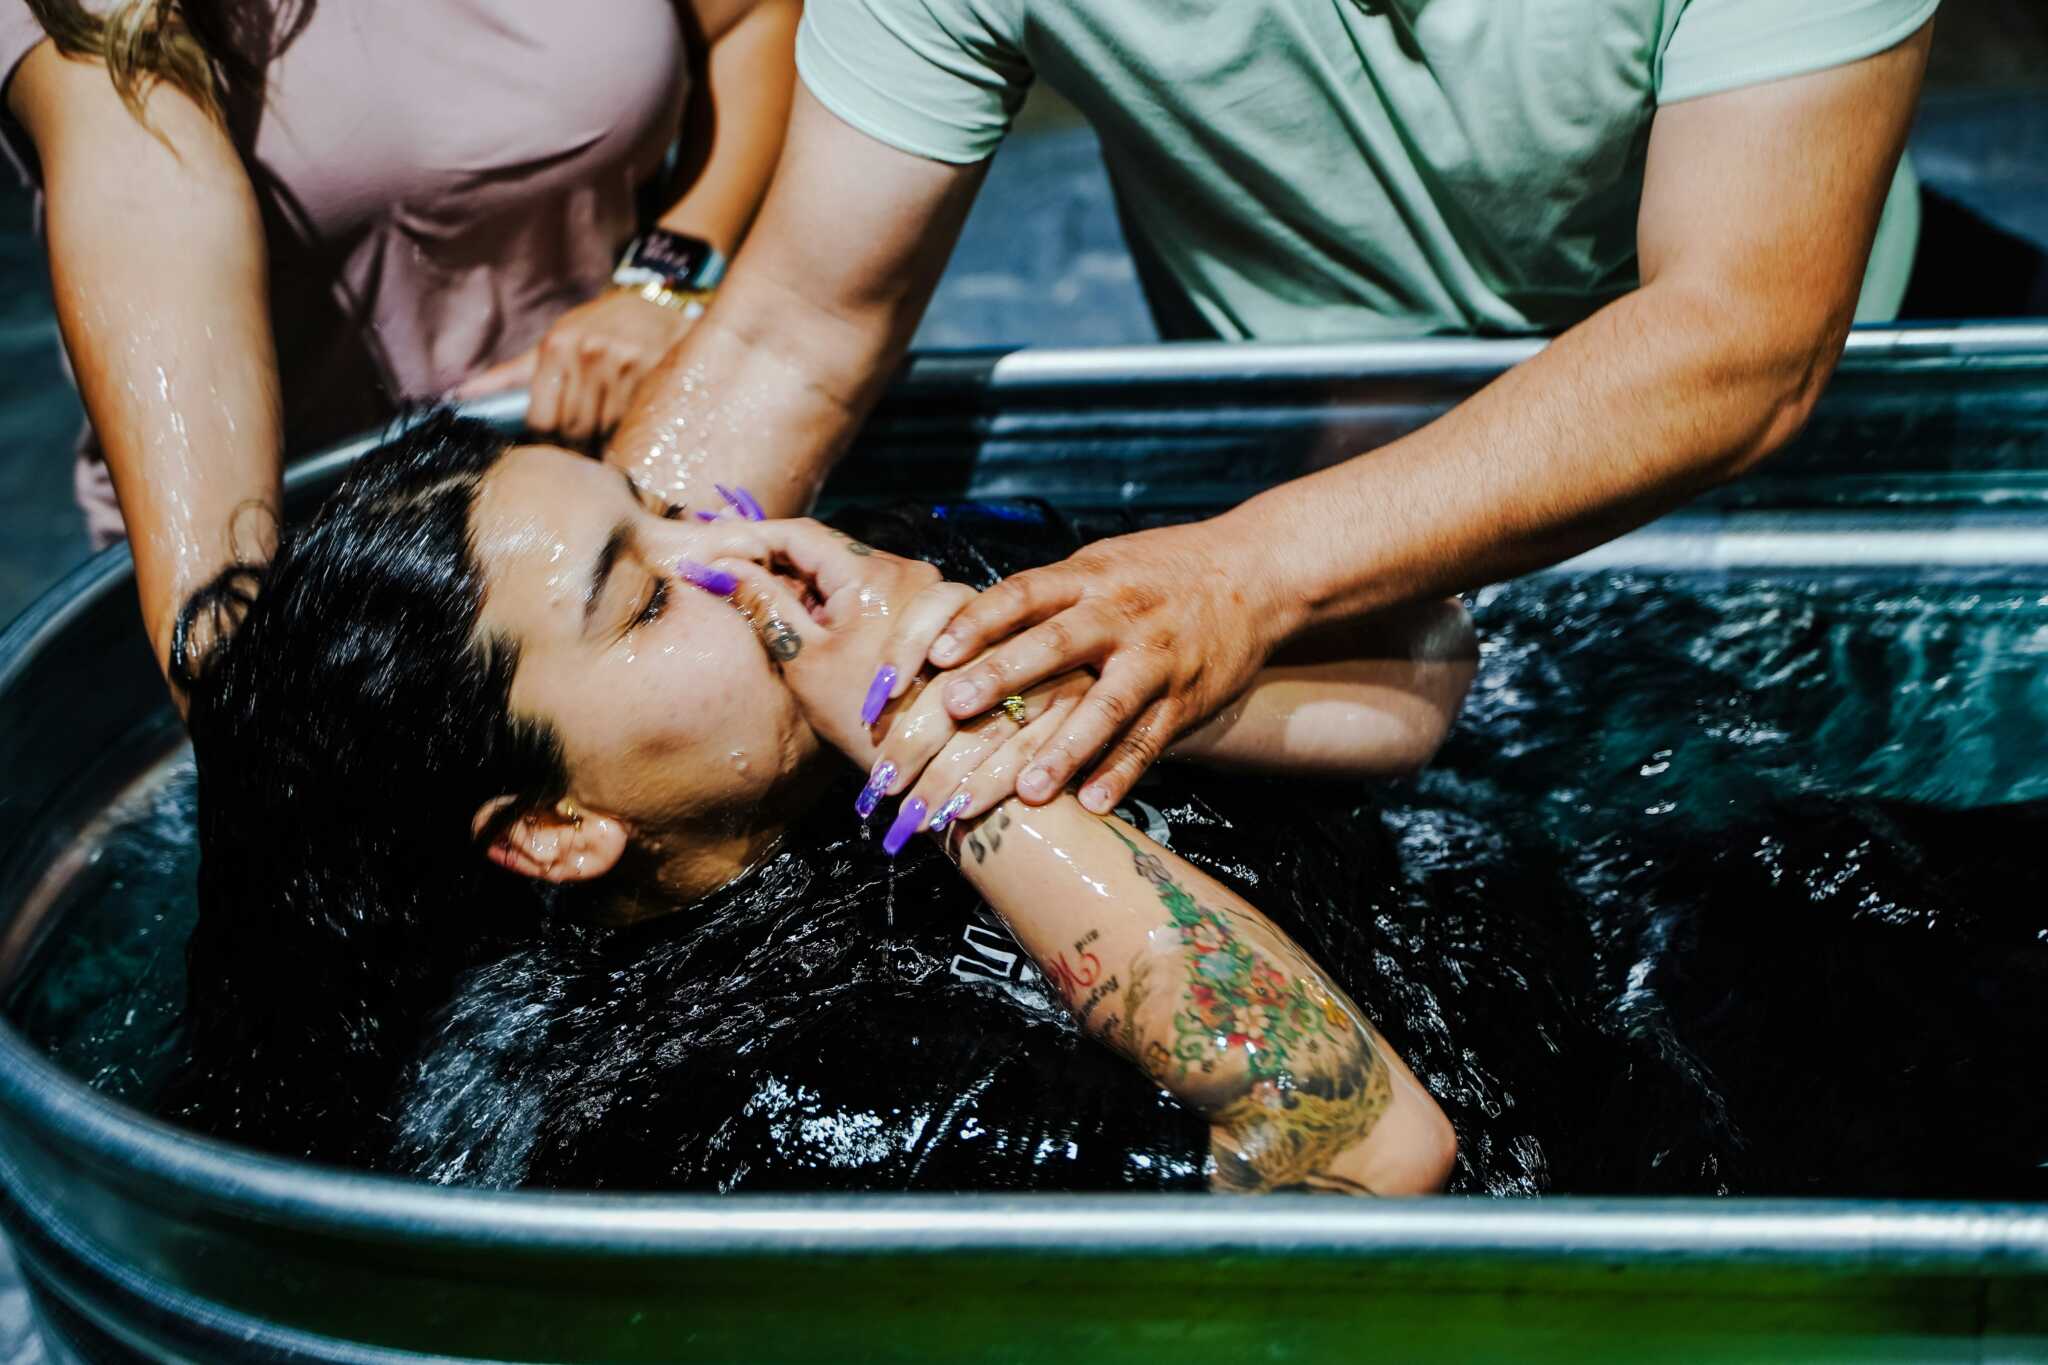 Hundreds of young people embrace Christ, Get spontaneously baptized in backs of pickup trucks in Georgia